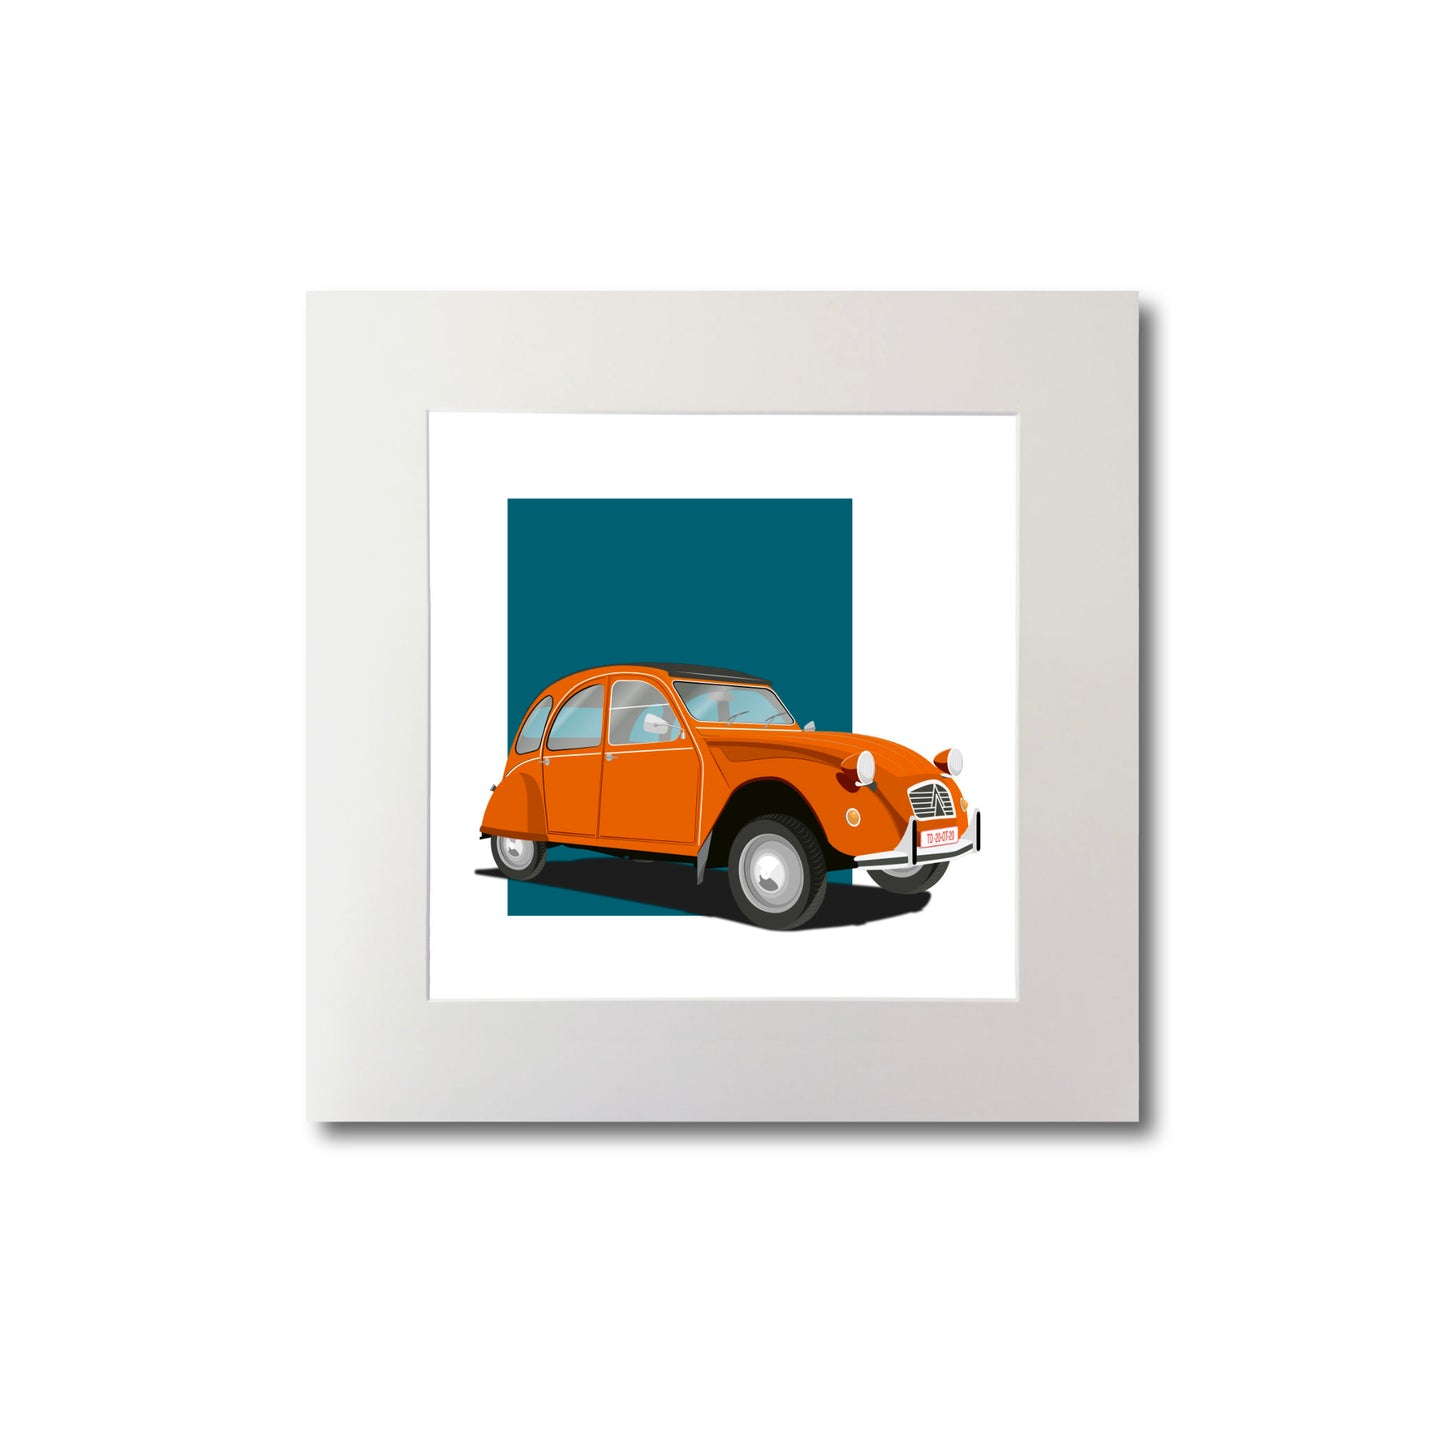 Illustration of an orange Citroën 2CV, mounted and measuring 20 by 20 cm